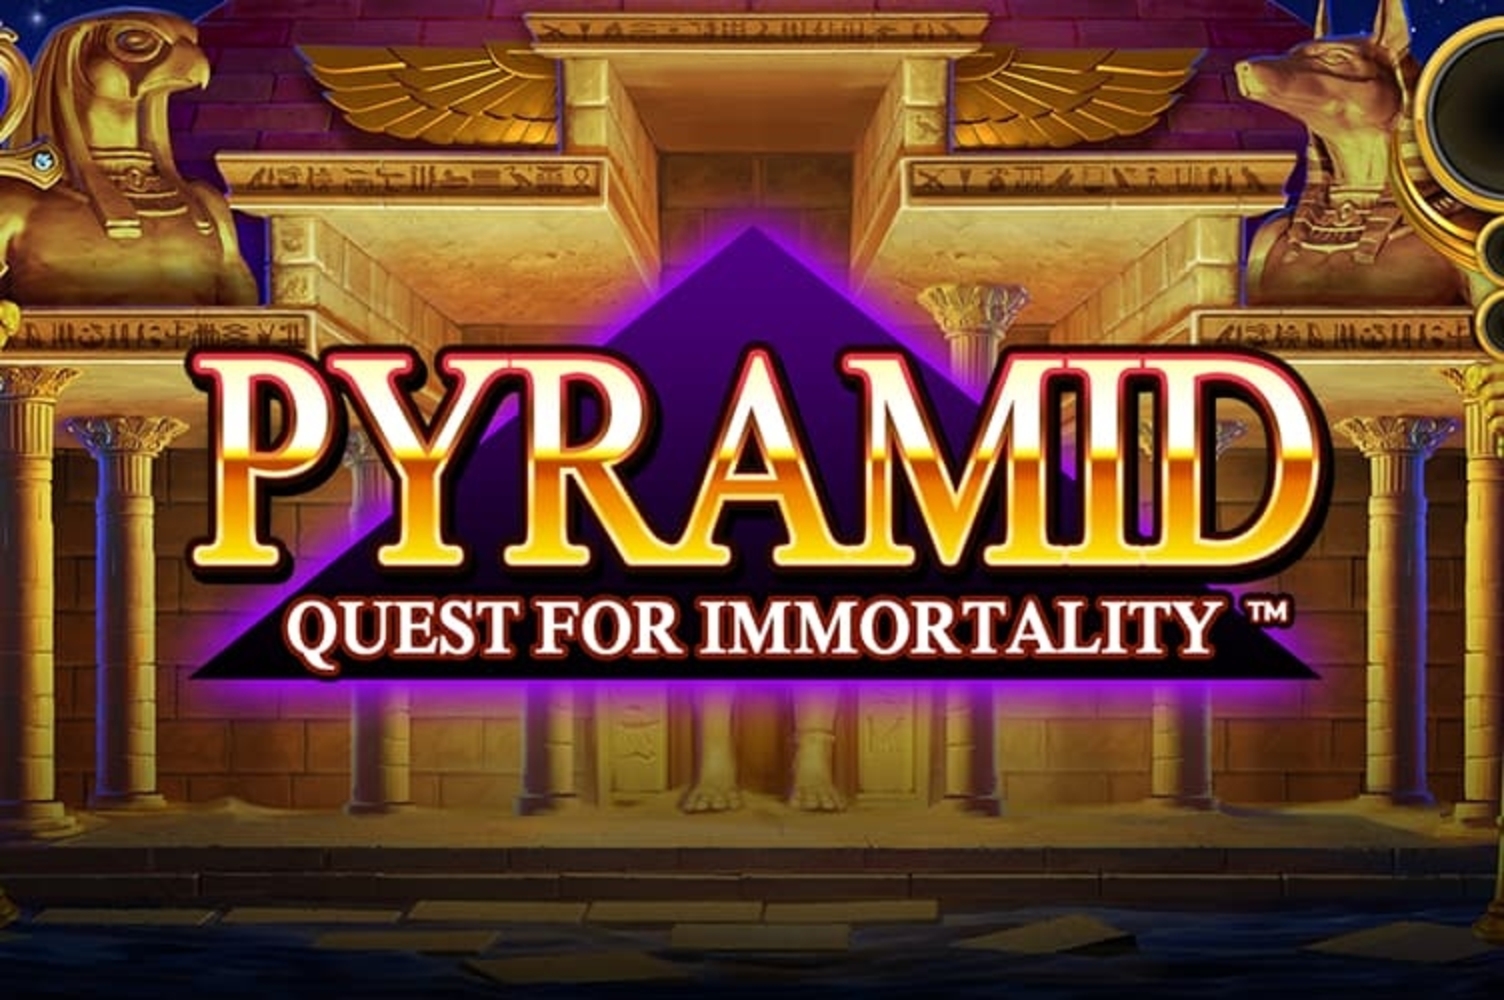 The Pyramid: Quest for Immortality Online Slot Demo Game by NetEnt